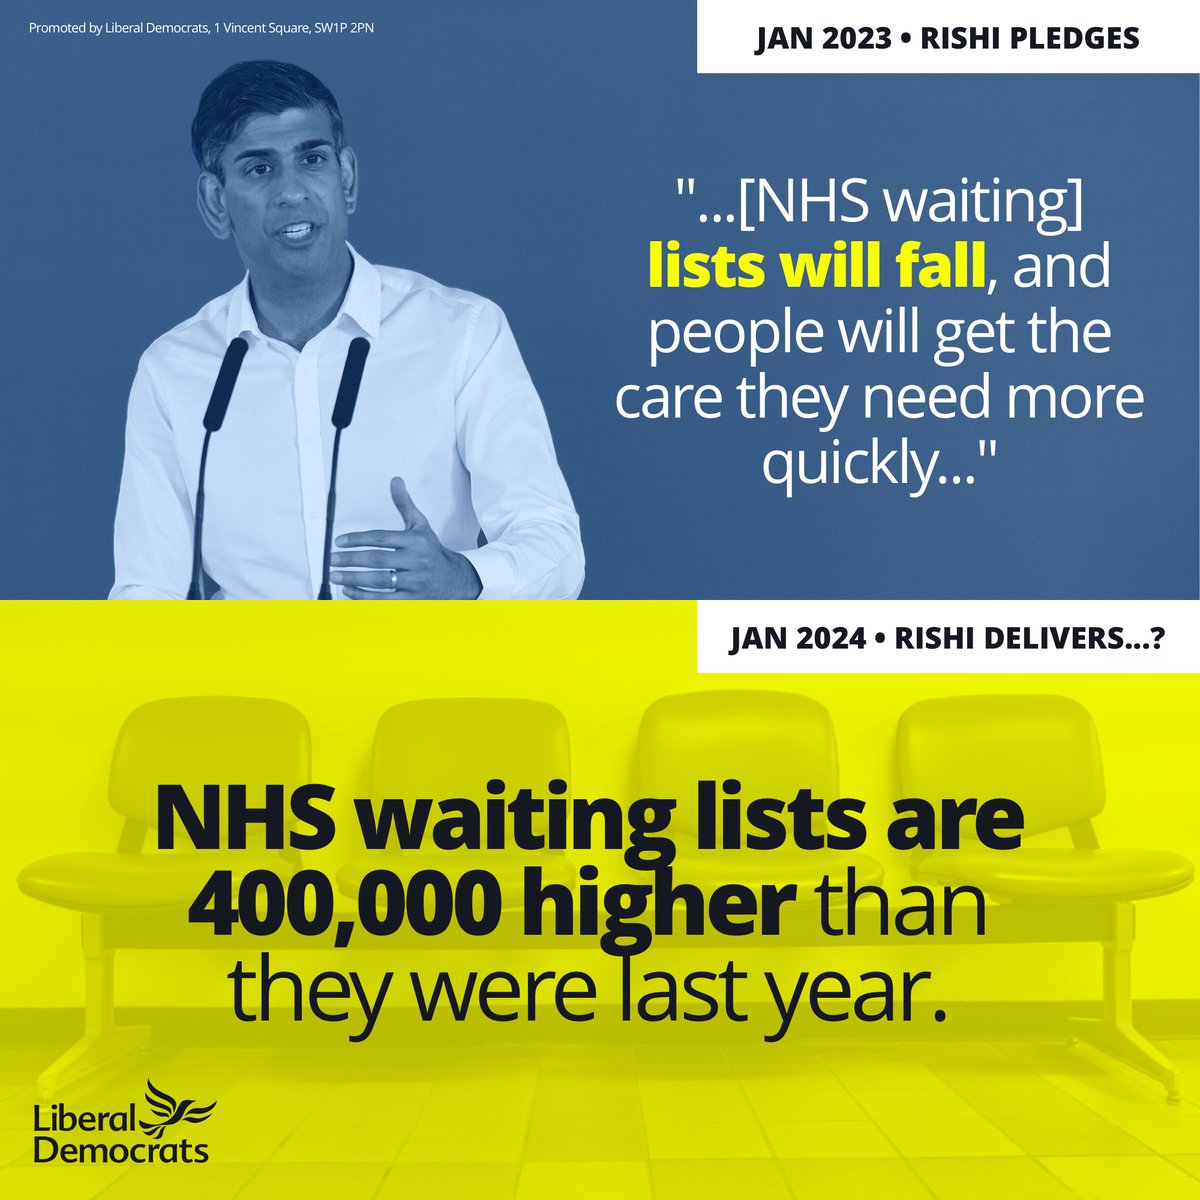 Rishi Sunak promised to cut NHS waiting lists. Instead he cut NHS spending. The only way to fix our NHS is with a general election now to kick this out-of-touch government out of office.